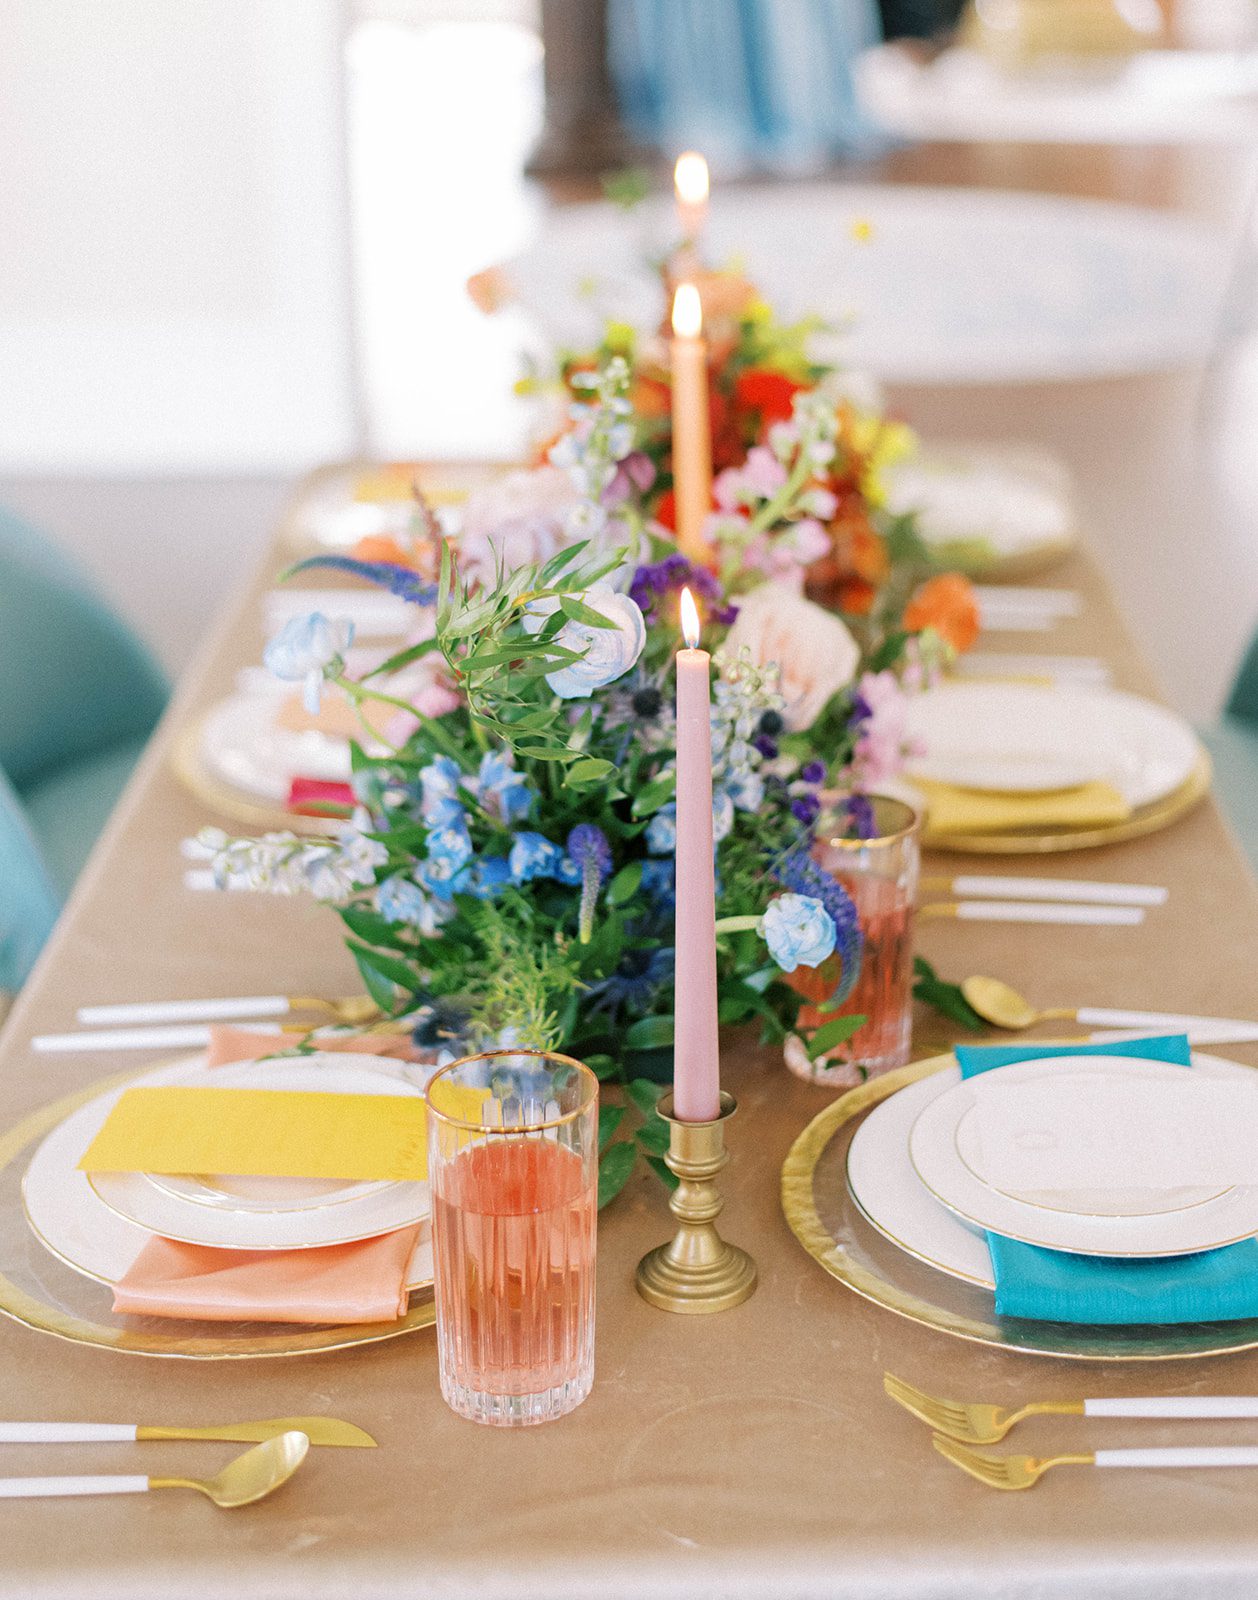 bright and vibrant wedding day table setting at The Orlo for a retro wedding inspiration with bright florals and tall candles